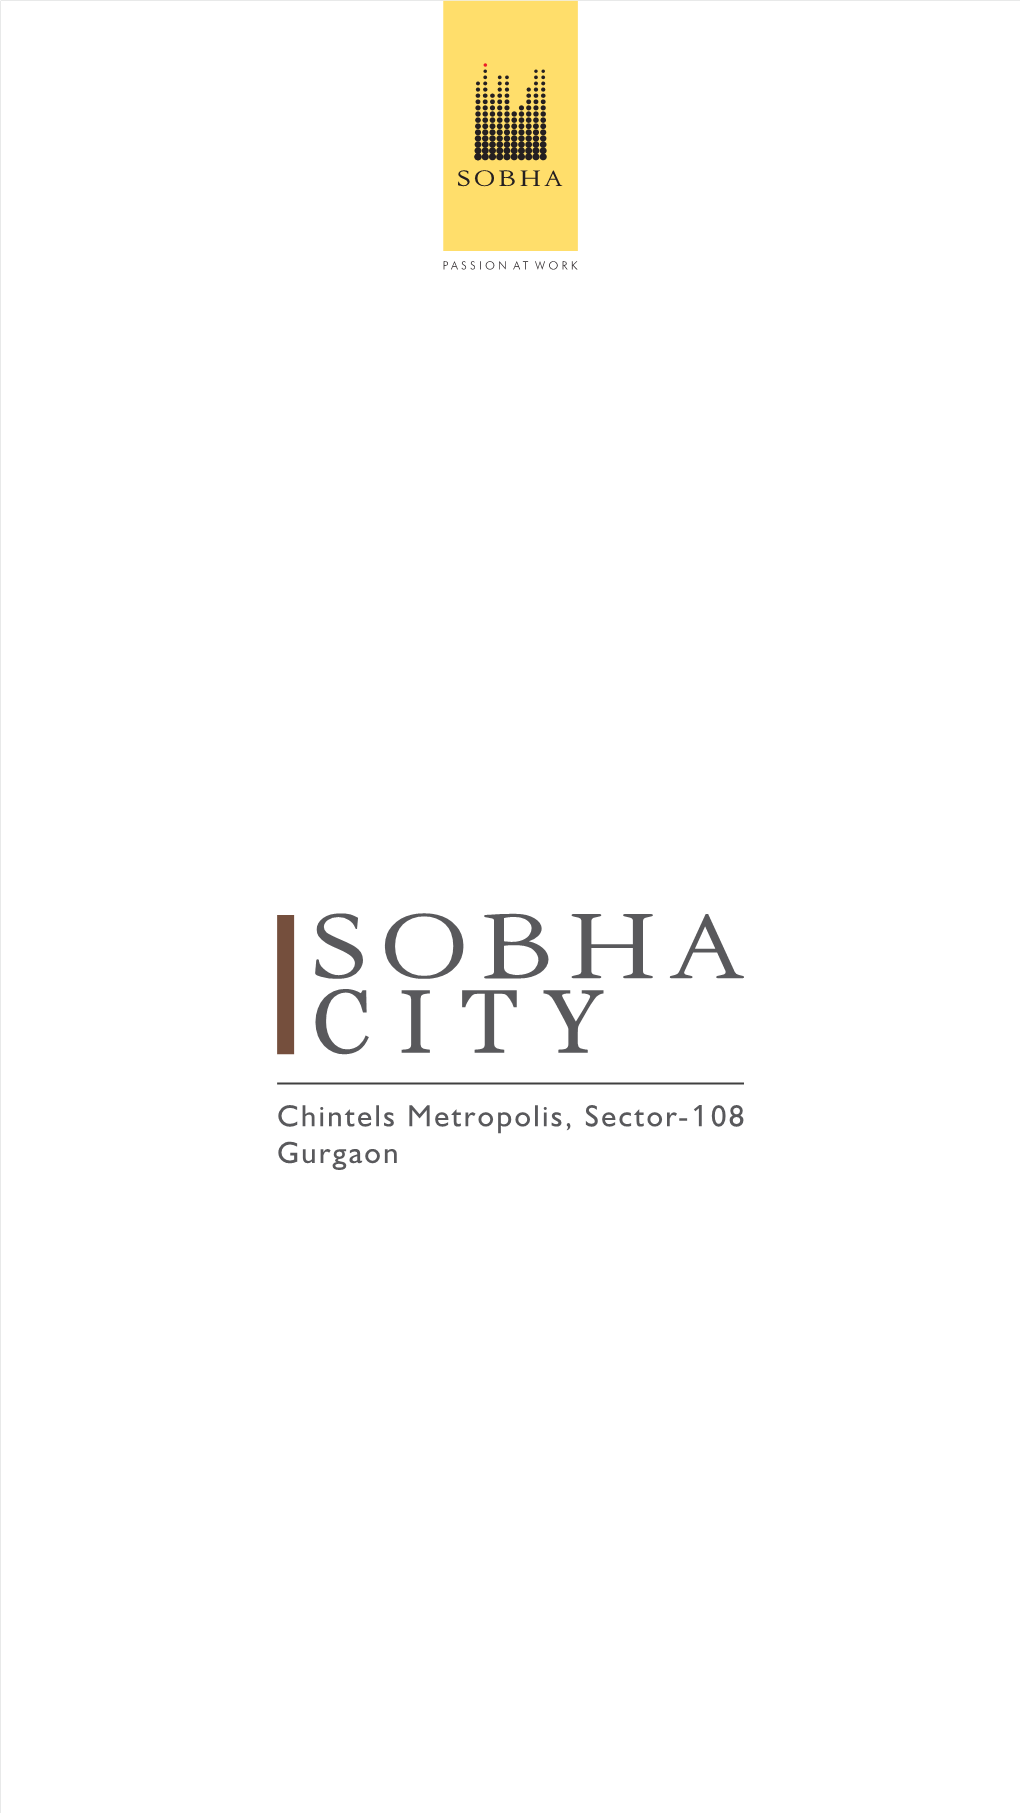 Sobha City Is Located Right at the Edge of Delhi, in Chintels Metropolis, Sector 108, Gurgaon